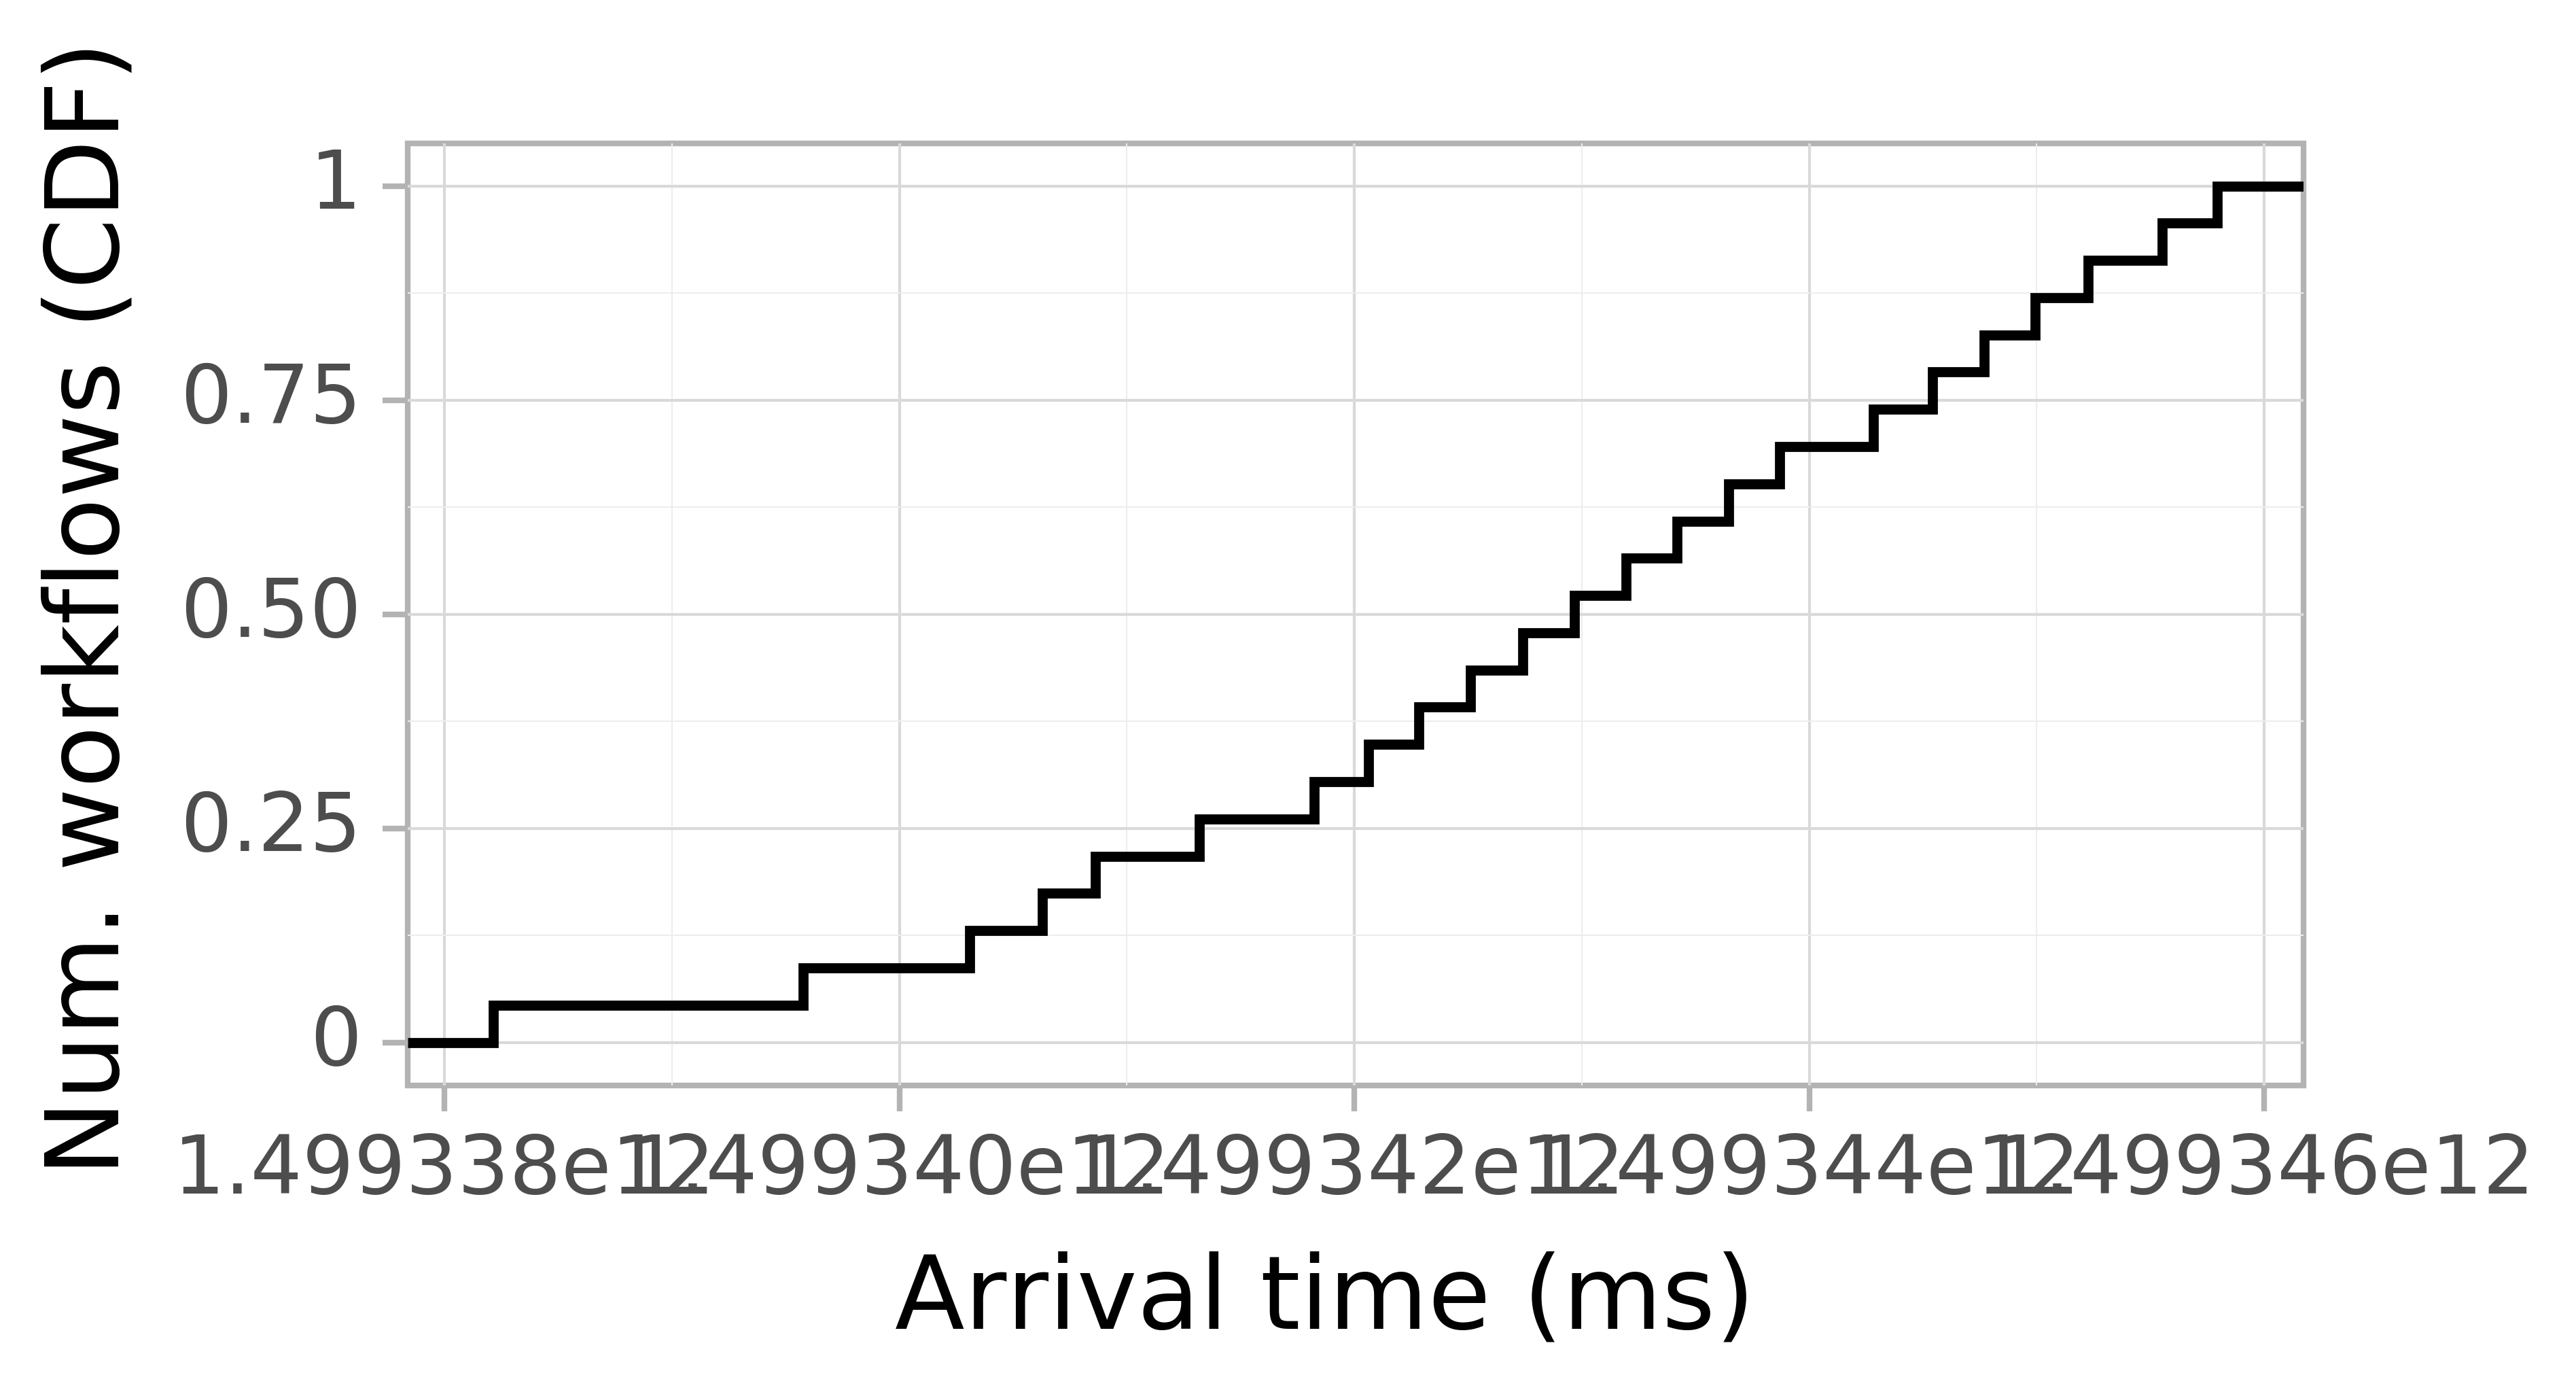 Job arrival CDF graph for the askalon-new_ee25 trace.